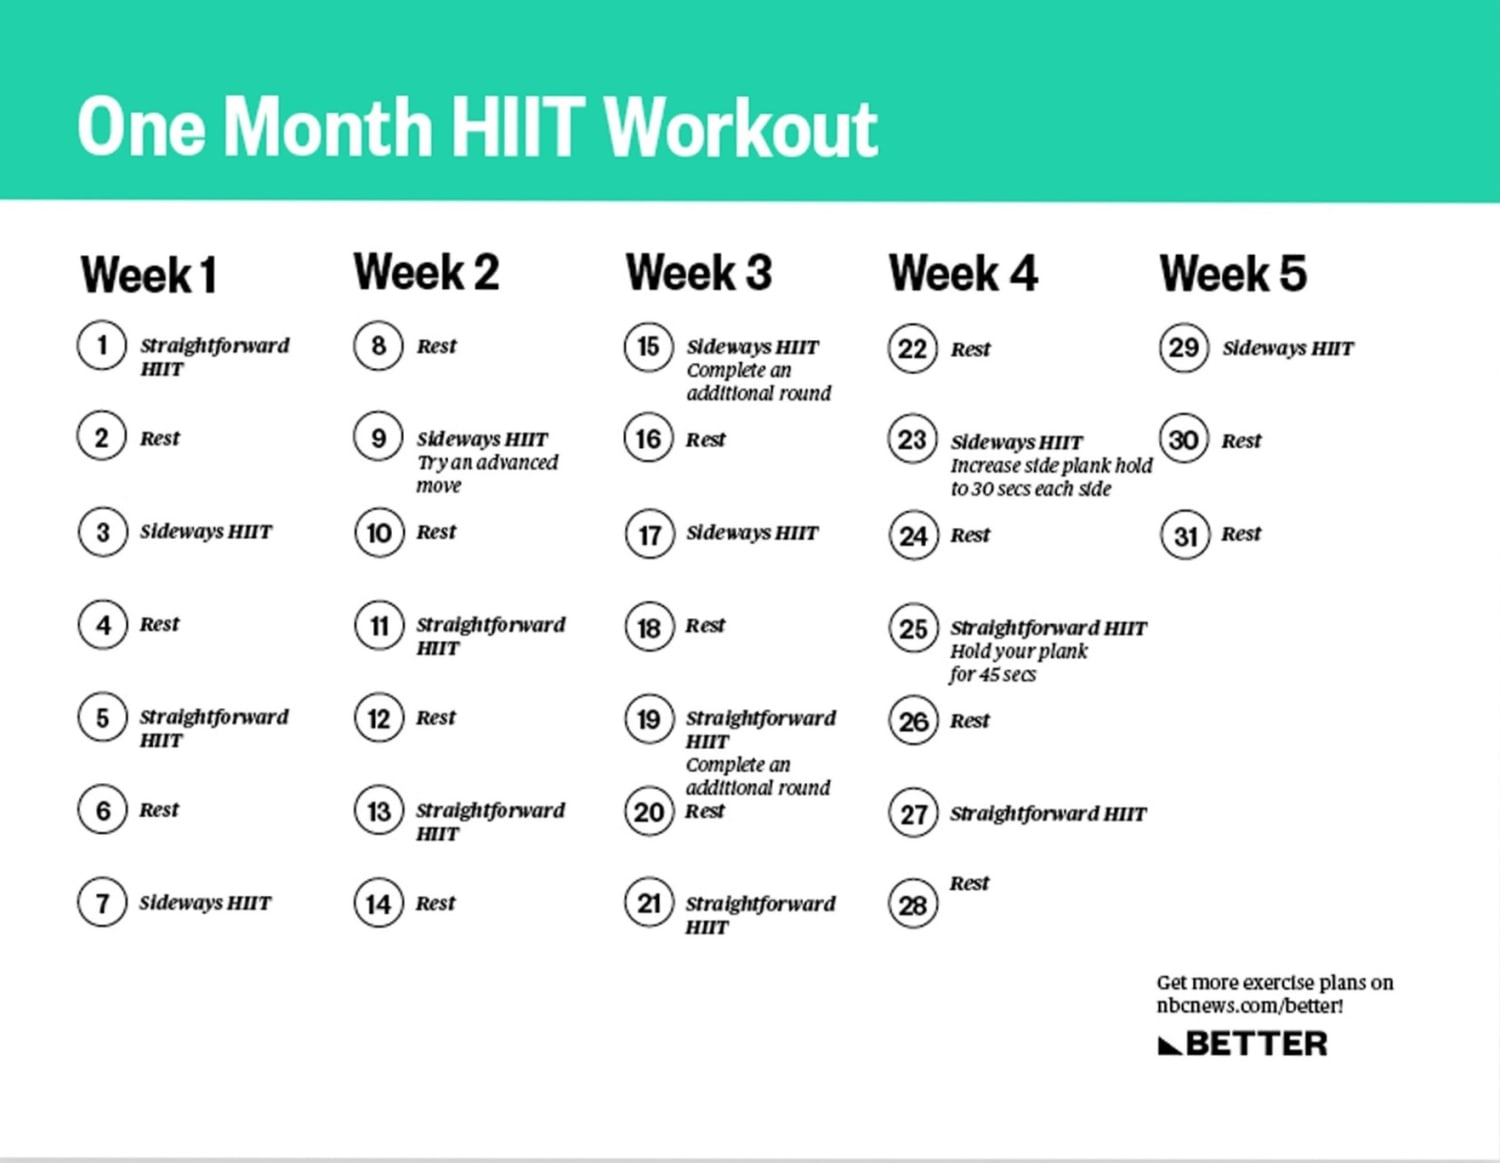 High-intensity workouts